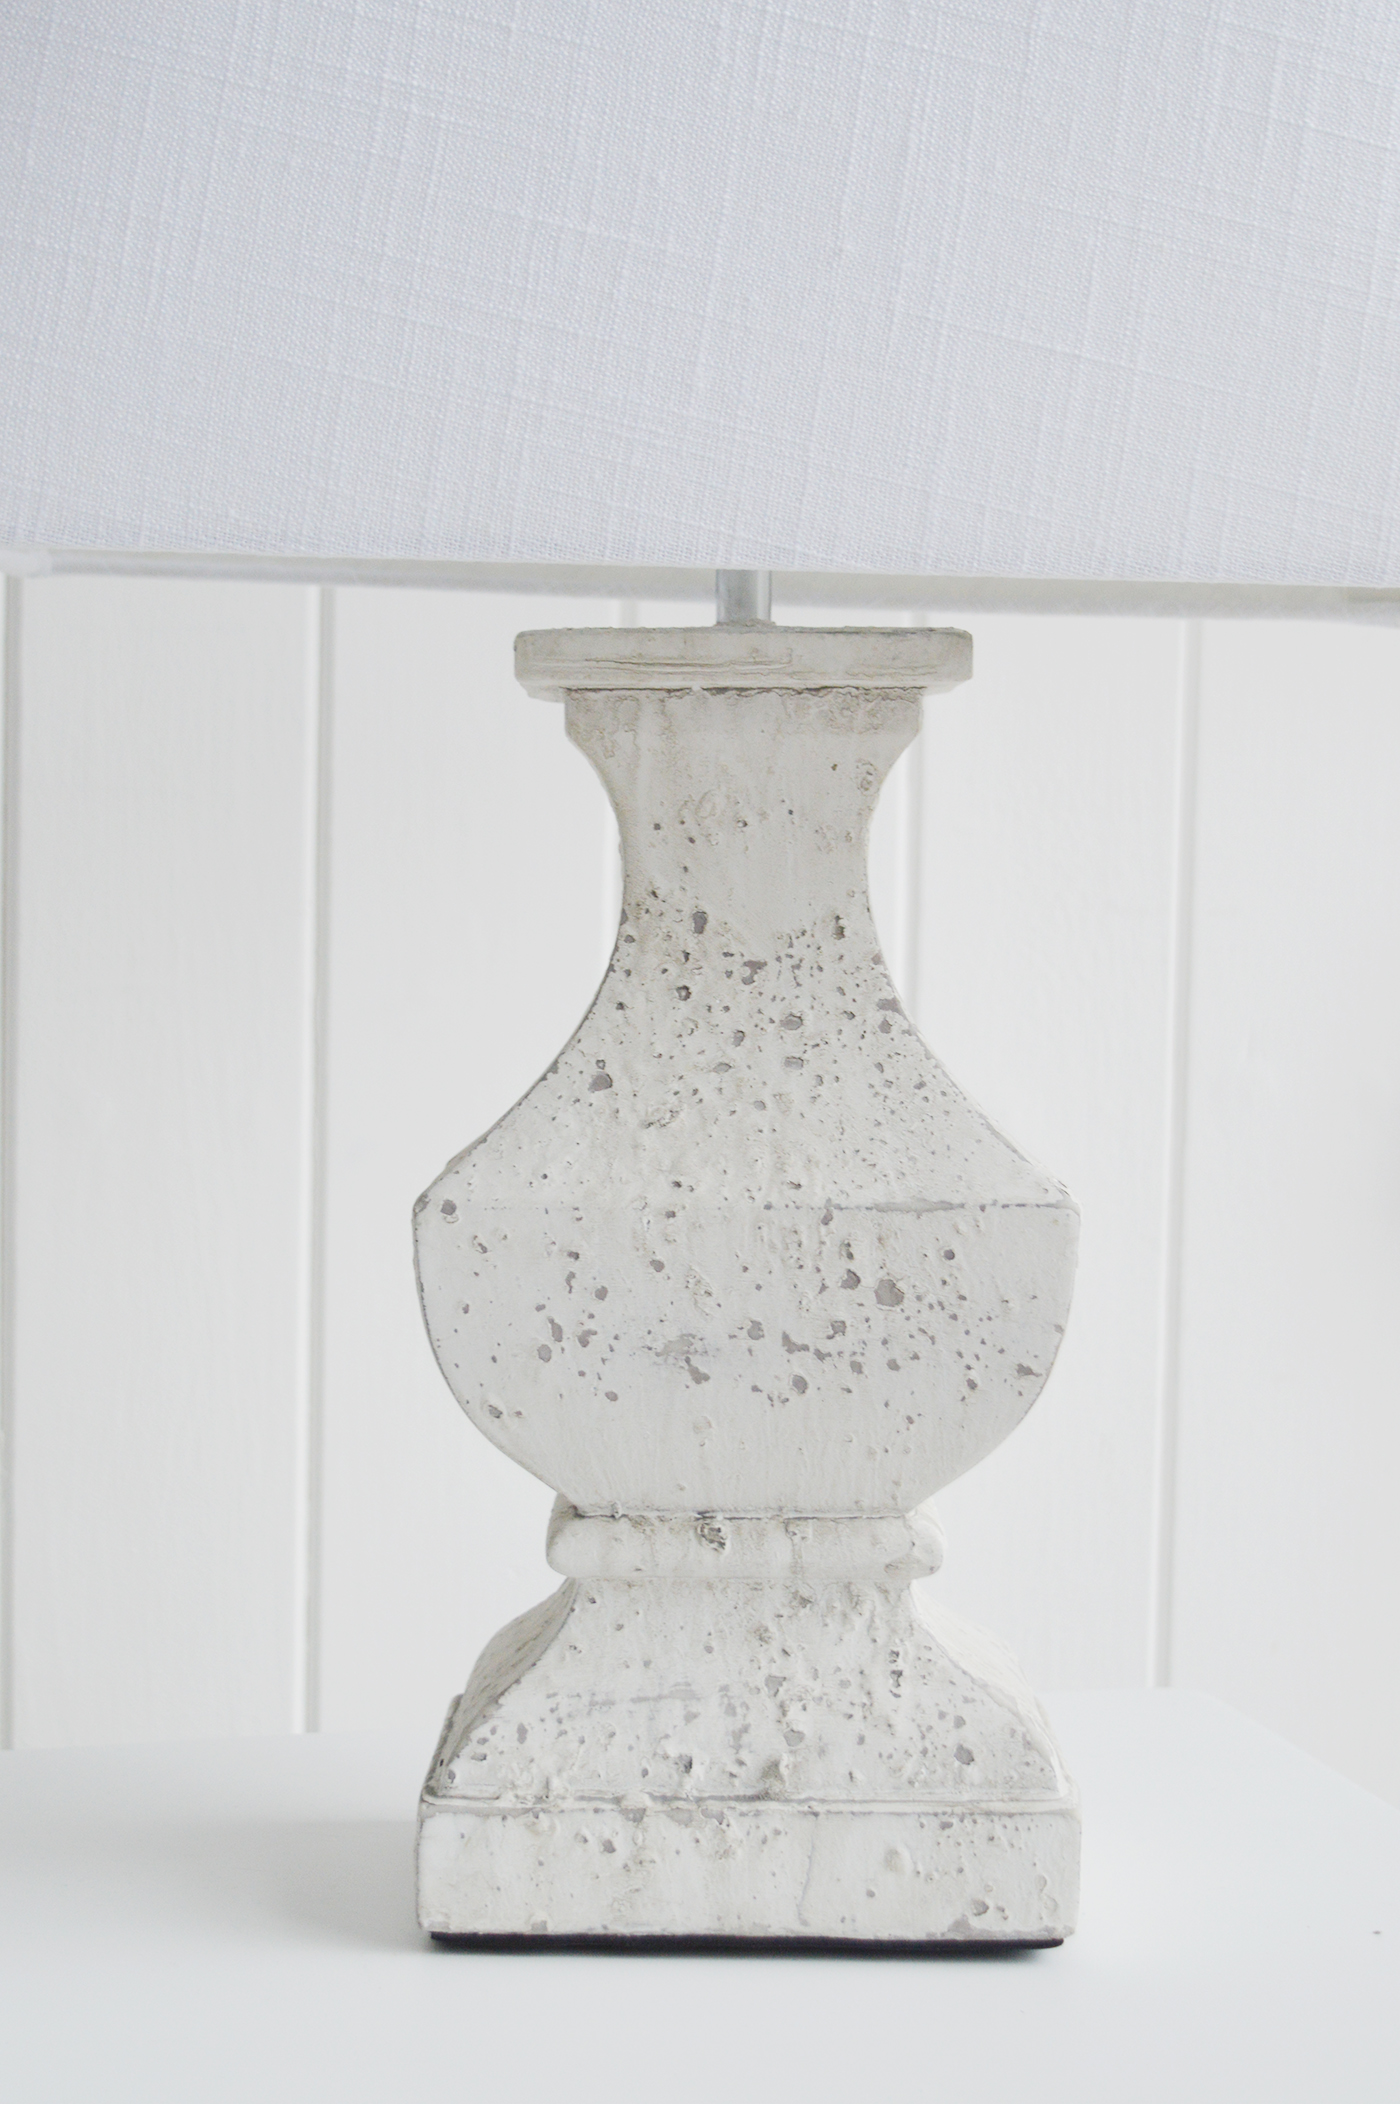 Hartford rustic grey table lamp from The White Lighthouse Furniture. A lovely table lamp for bedside table or living room. New England furniture and interiors for coastal, country and city homes